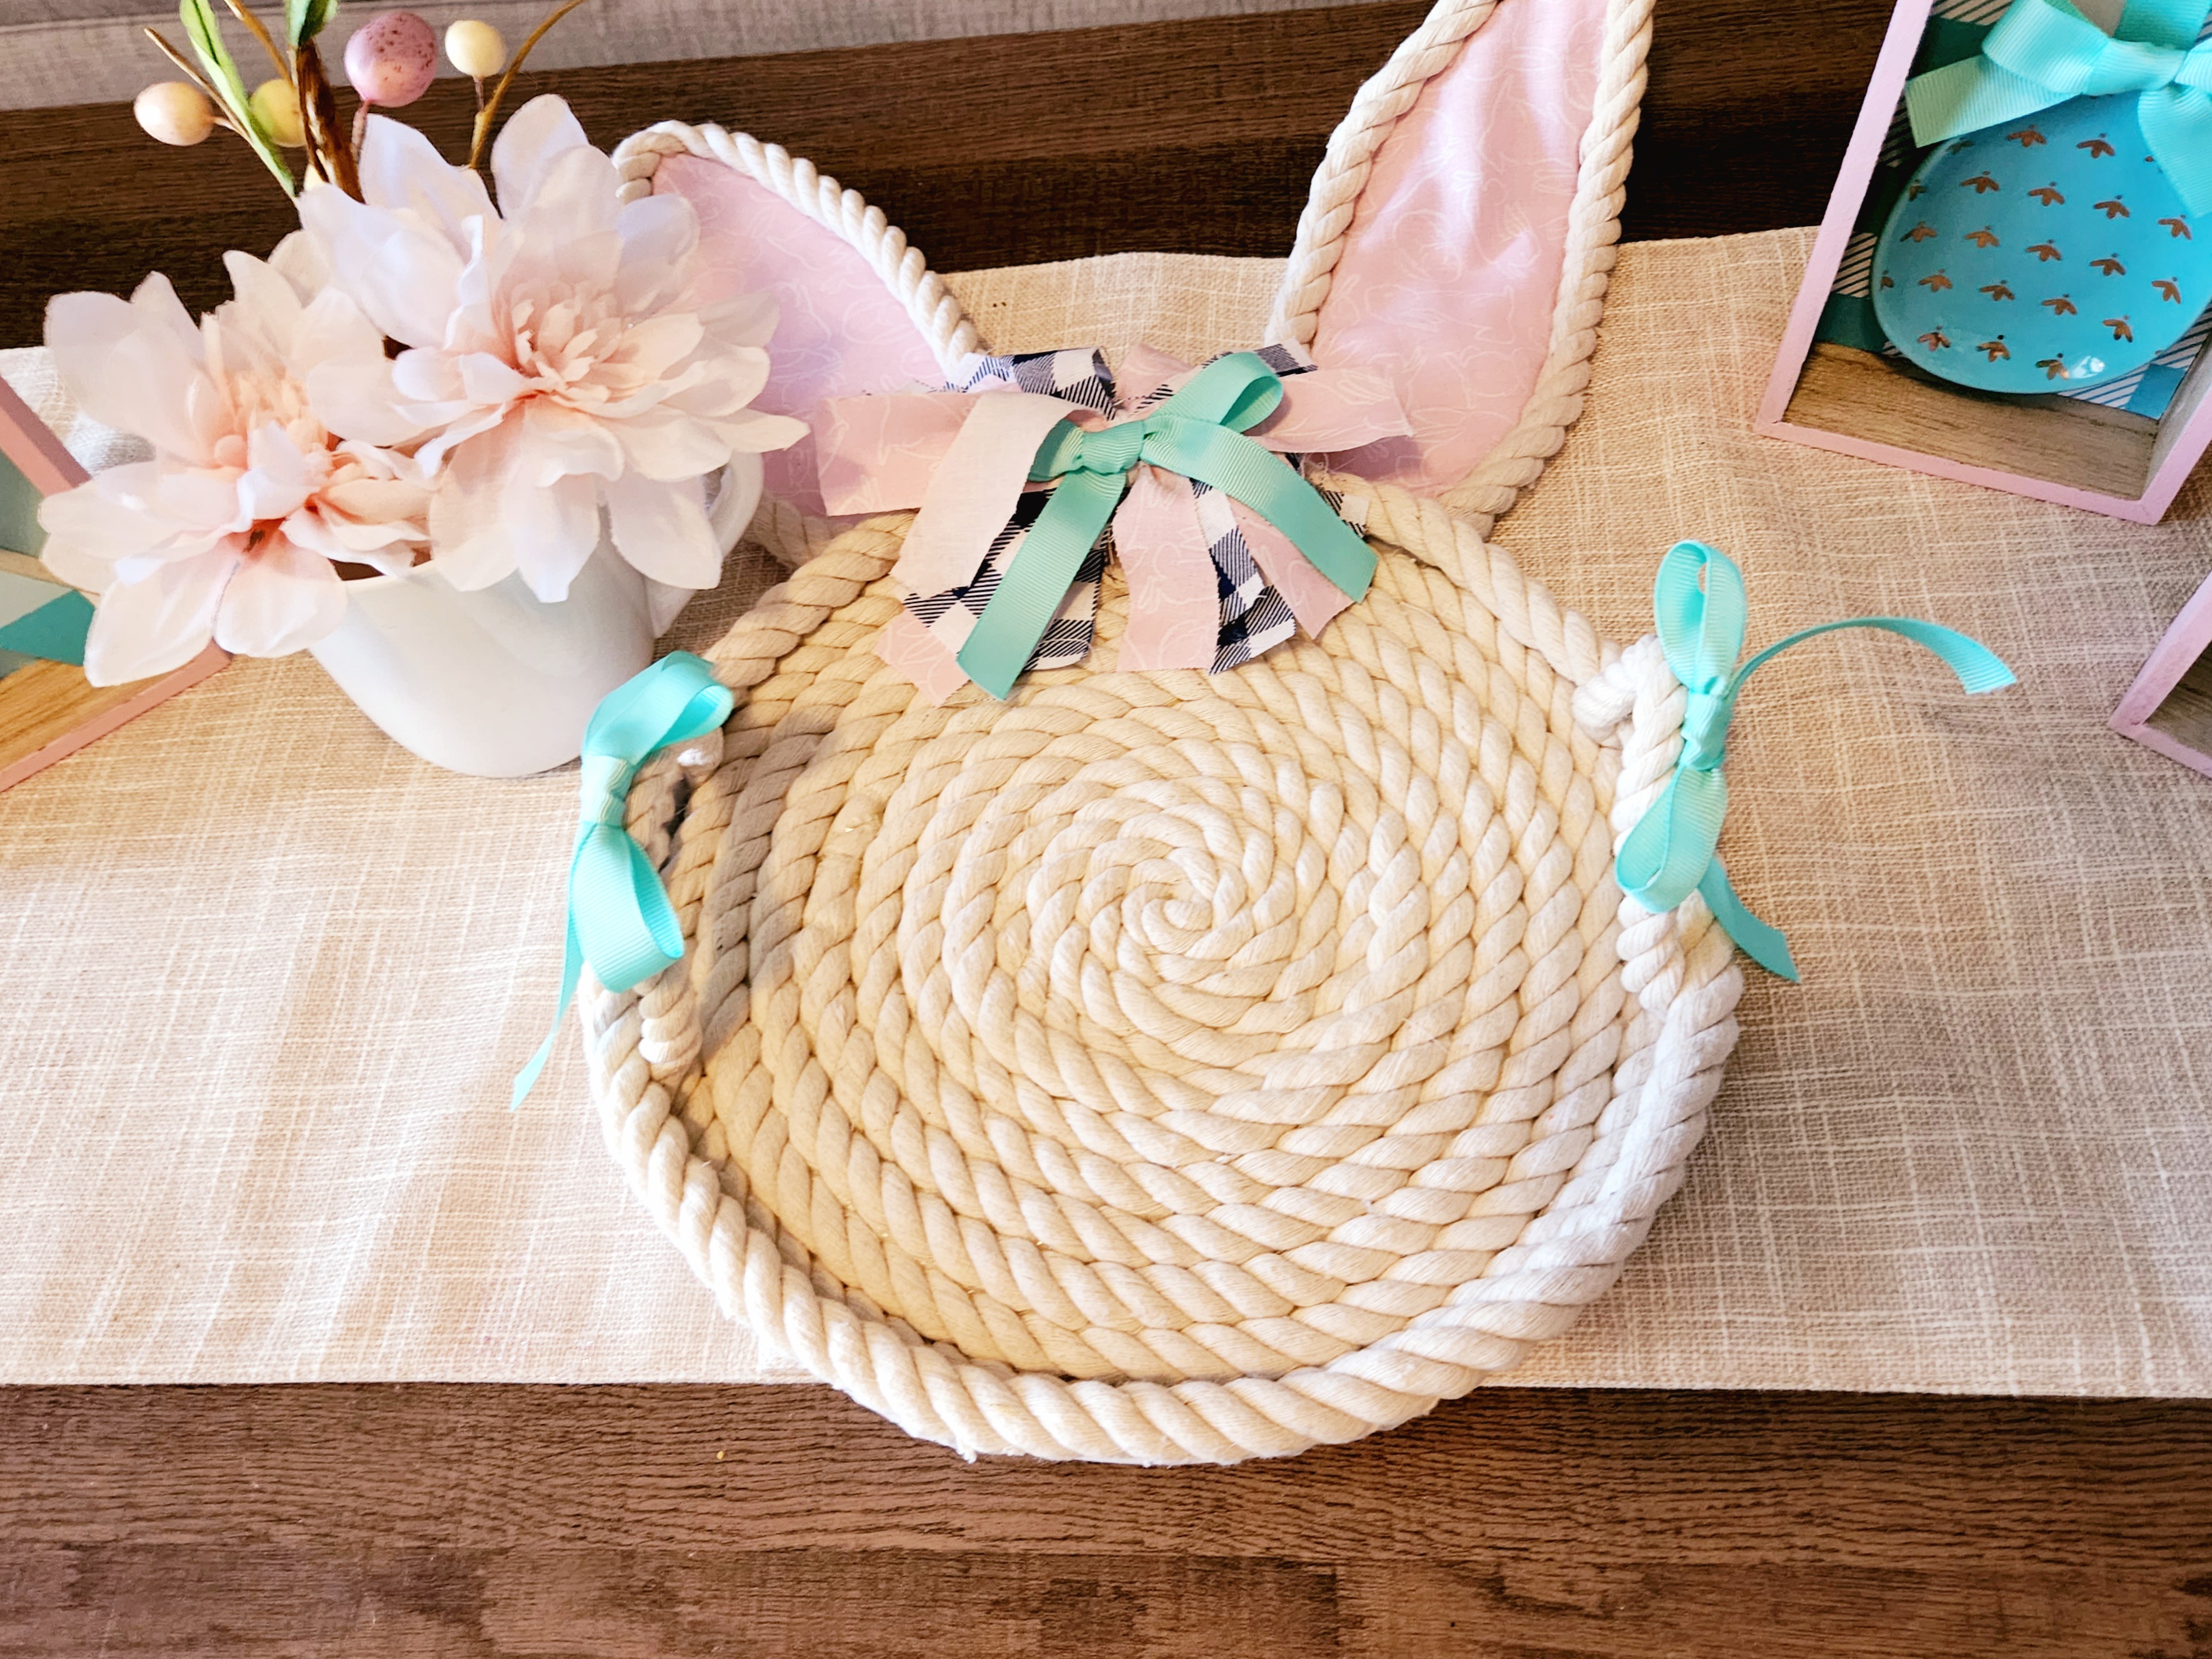 Spring decor rope bunny tray complete with a white mug, flowers, and Easter egg pick on it.